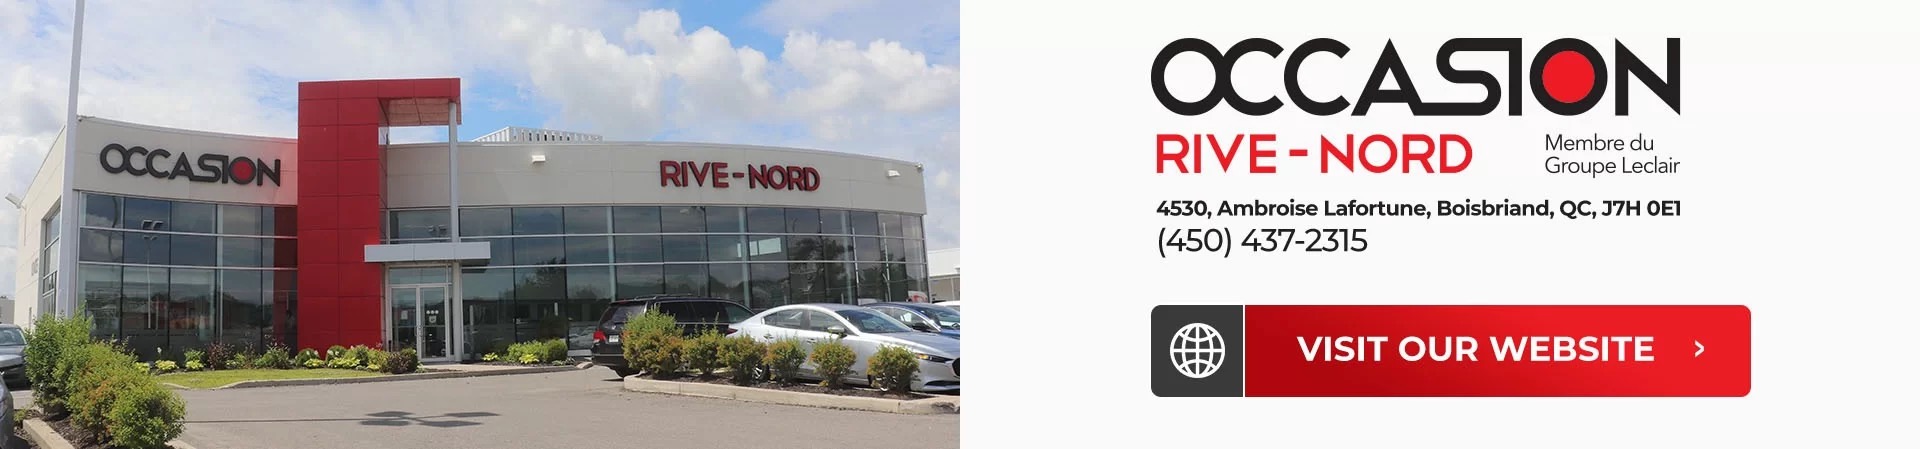 picture of a used cars dealership occasion rive-nord in boisbriand